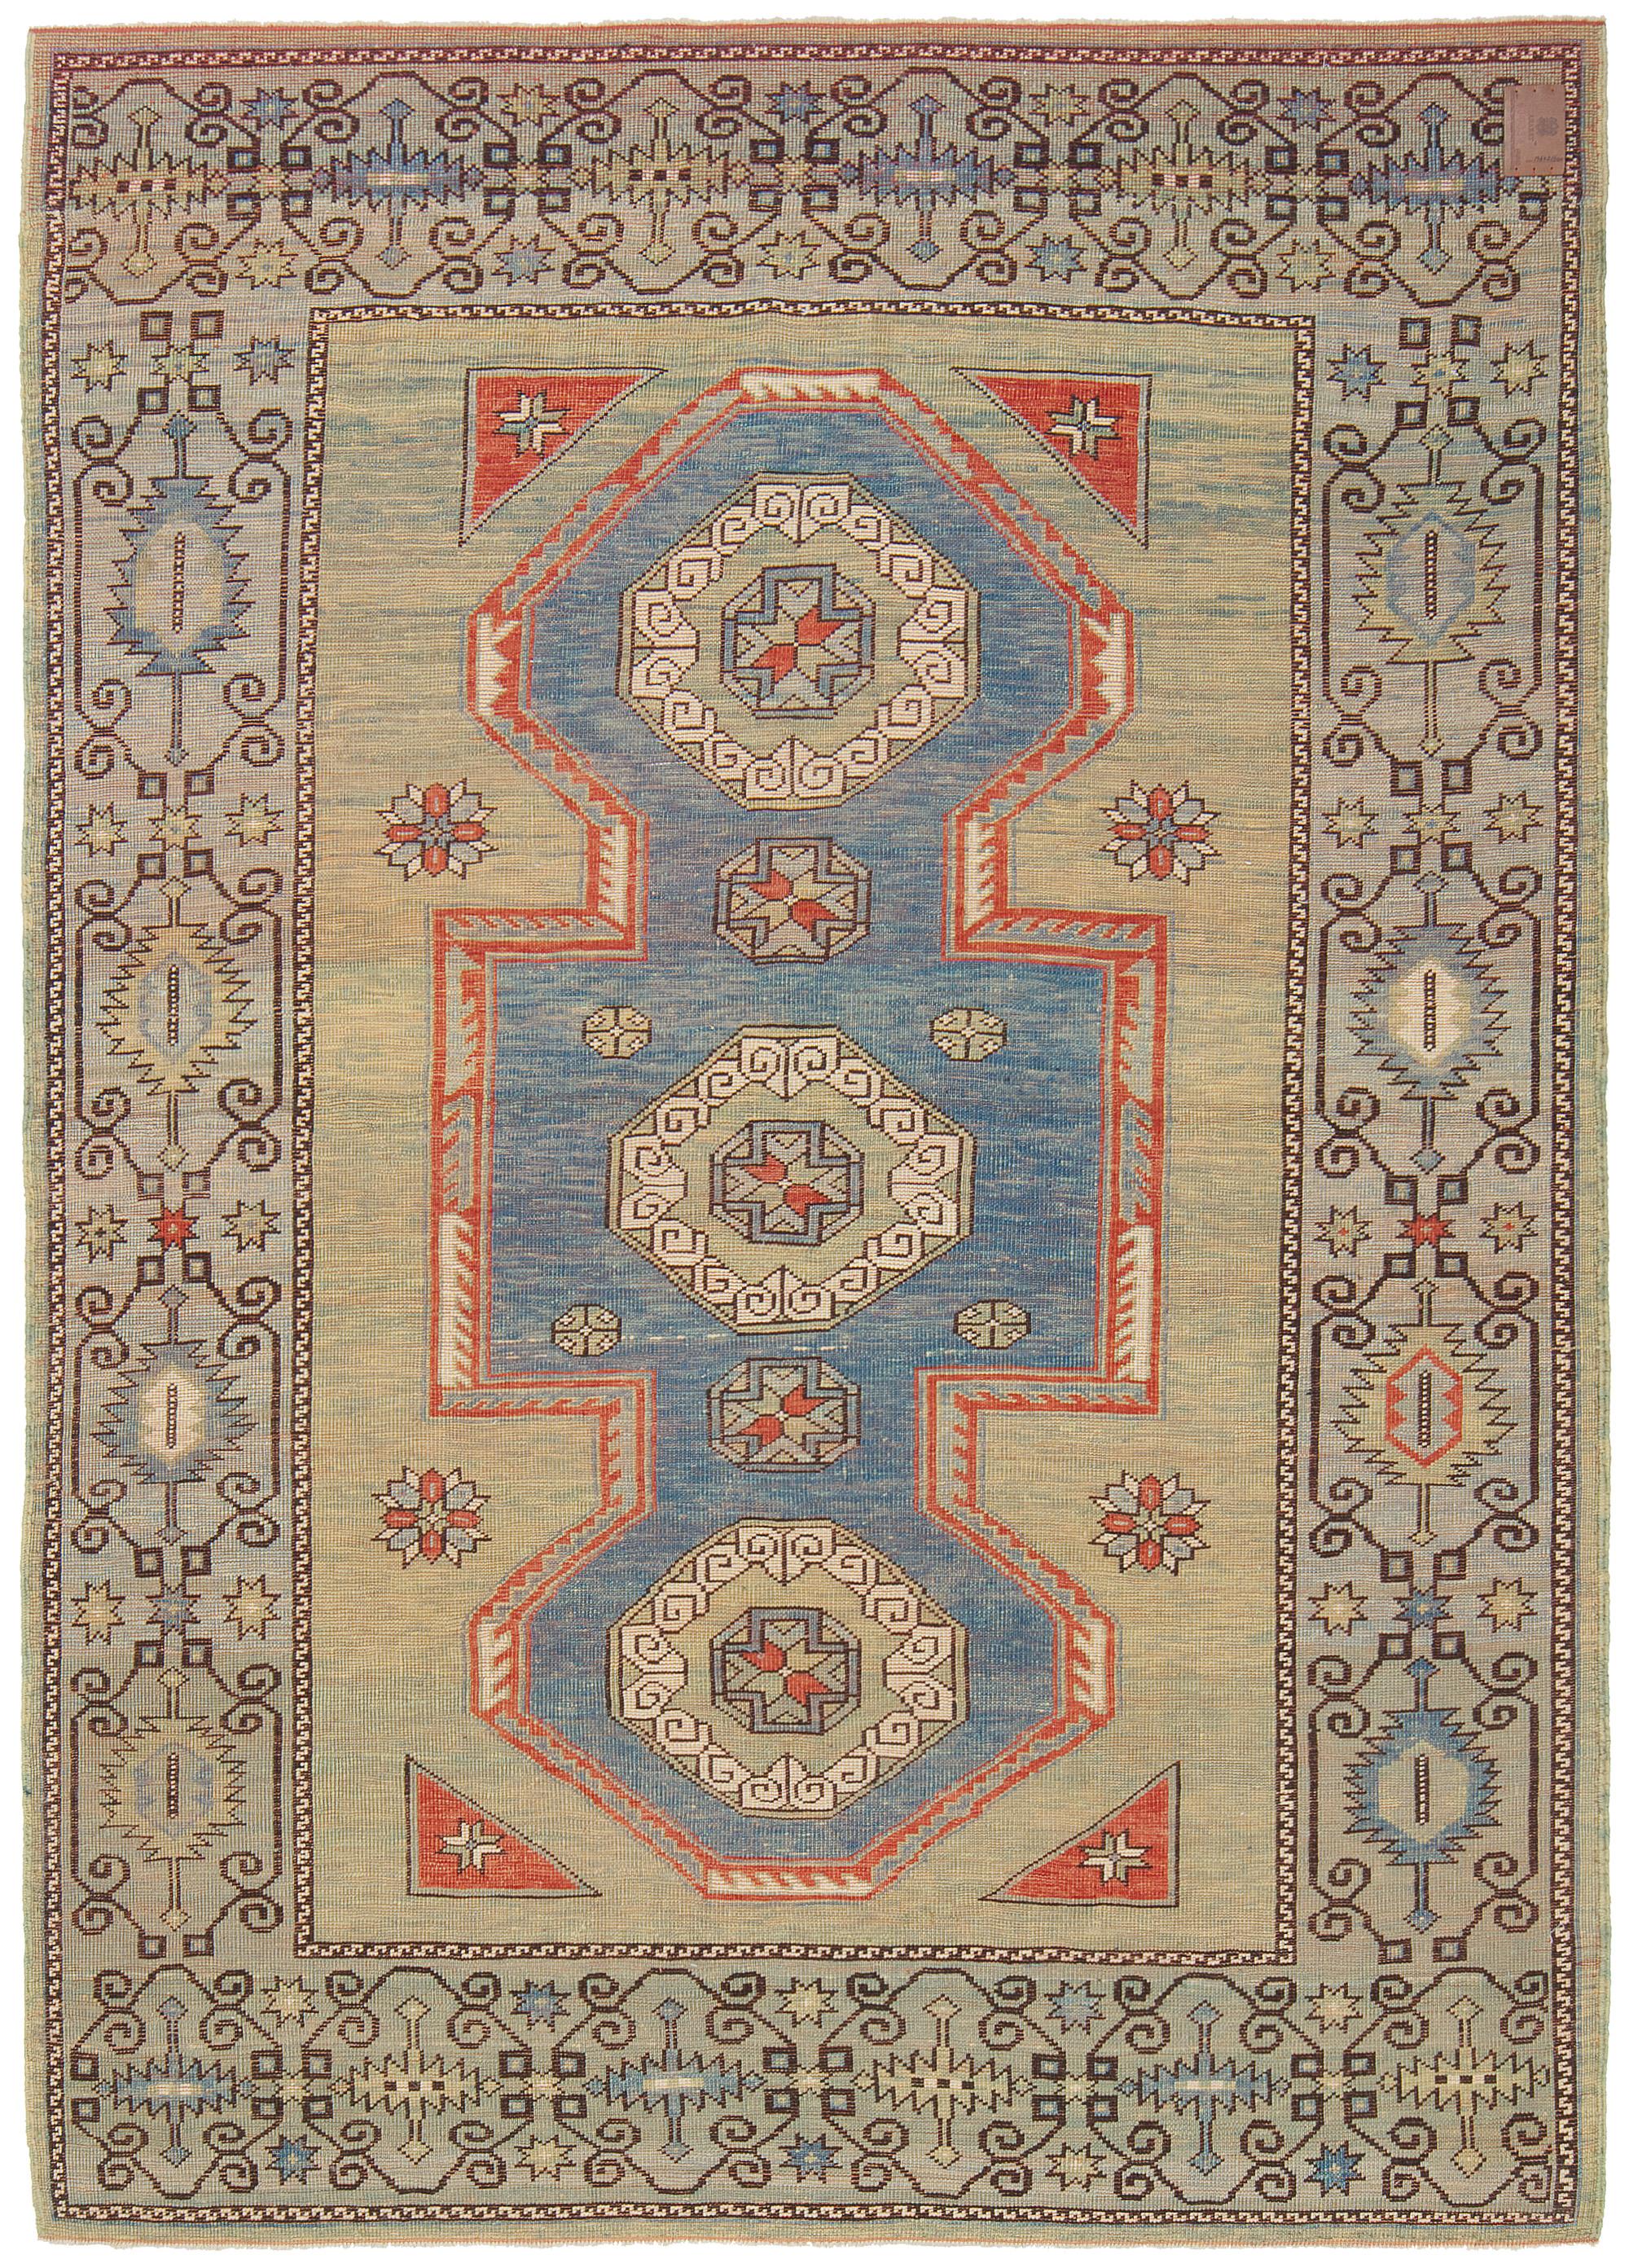 The source of carpet comes from the book Orient Star – A Carpet Collection, E. Heinrich Kirchheim, Hali Publications Ltd, 1993 nr.159. The field drawing is gardens with a pond designed 16th-century rug from Konya, Central Anatolia area, Turkey. It’s